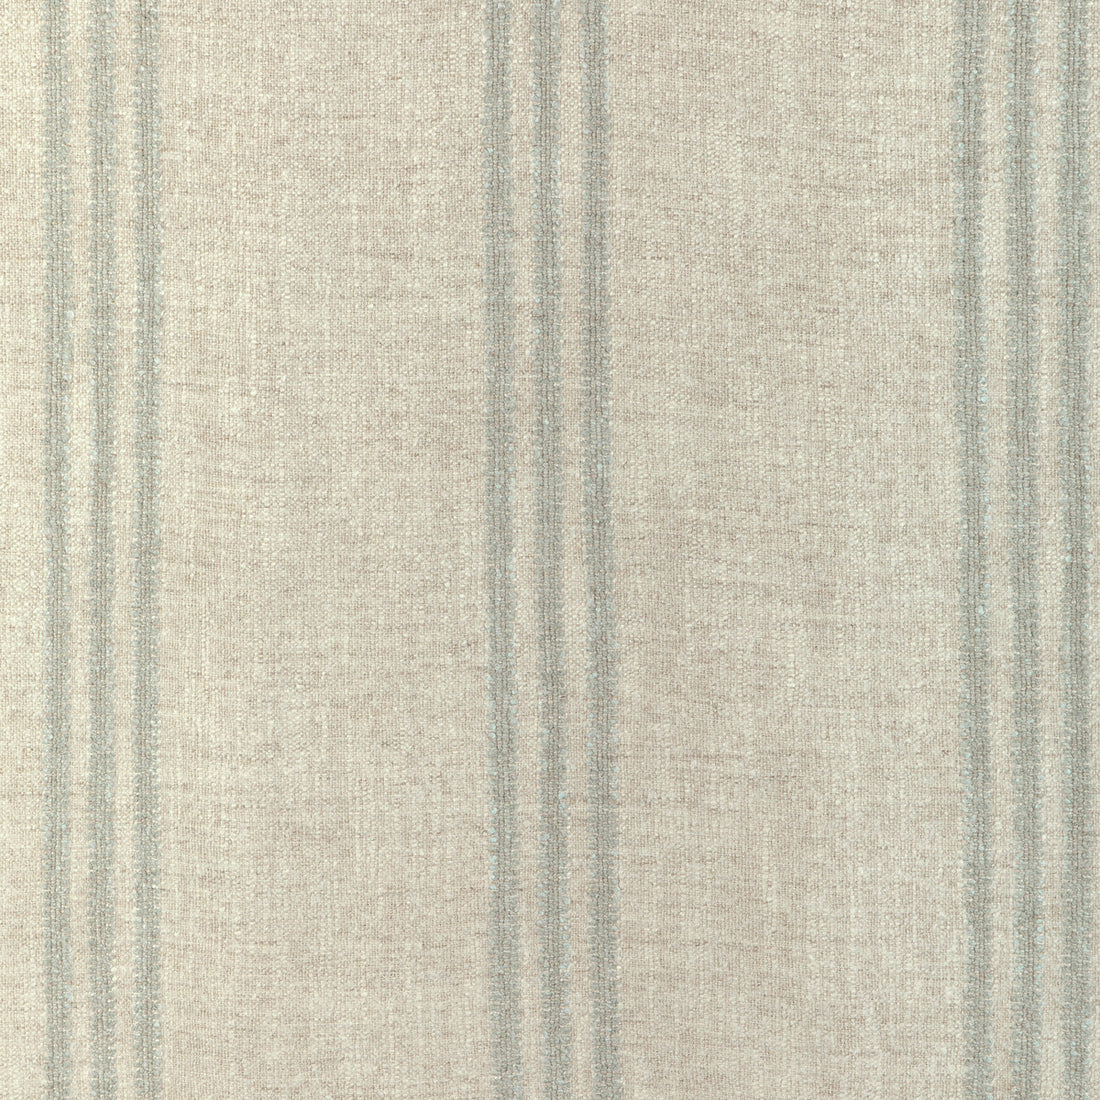 Karphi Stripe fabric in mist color - pattern 35860.1615.0 - by Kravet Couture in the Atelier Weaves collection